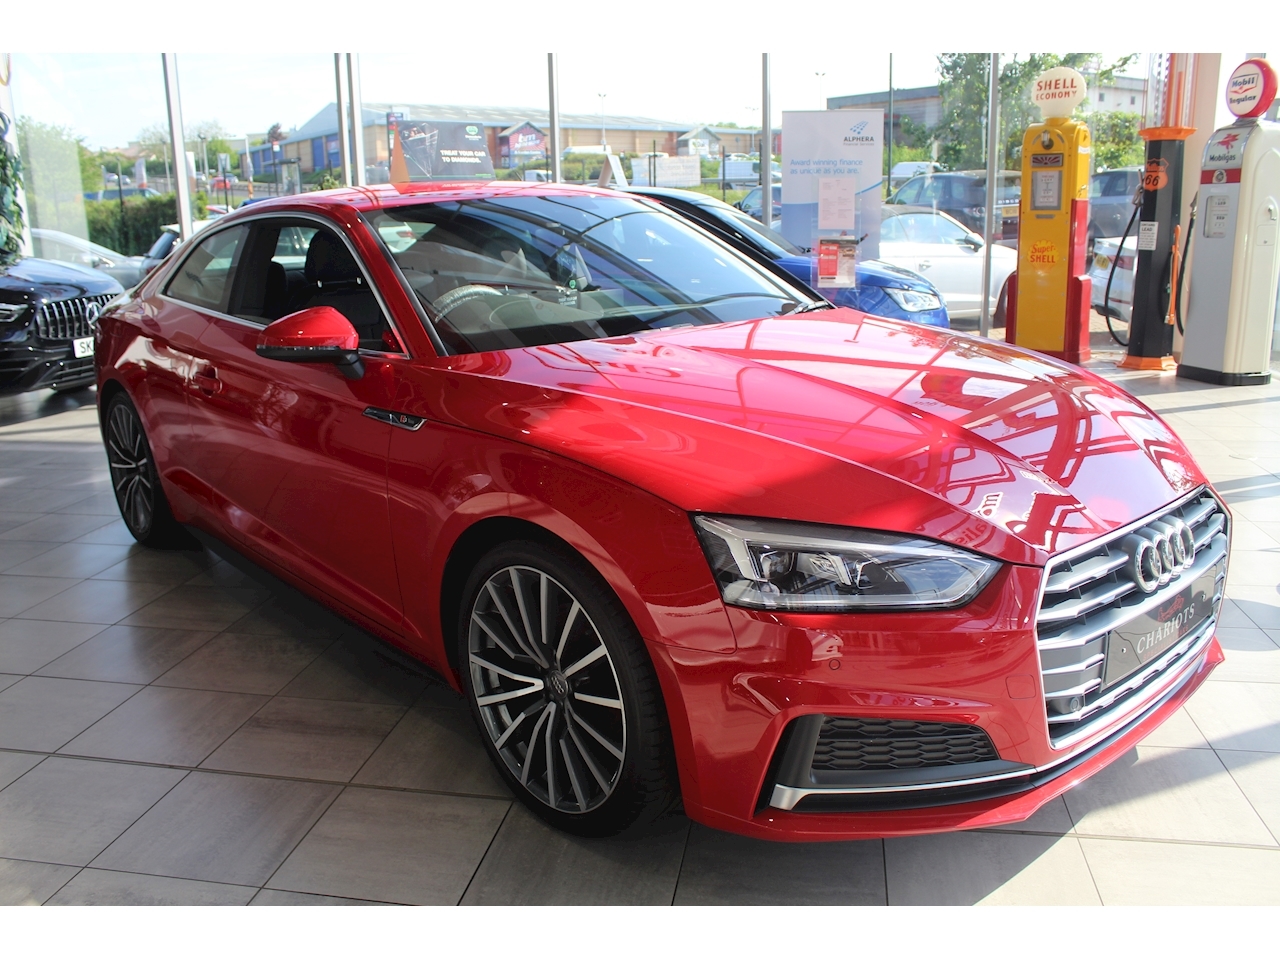 A5 S line Coupe 2.0 S Tronic Petrol